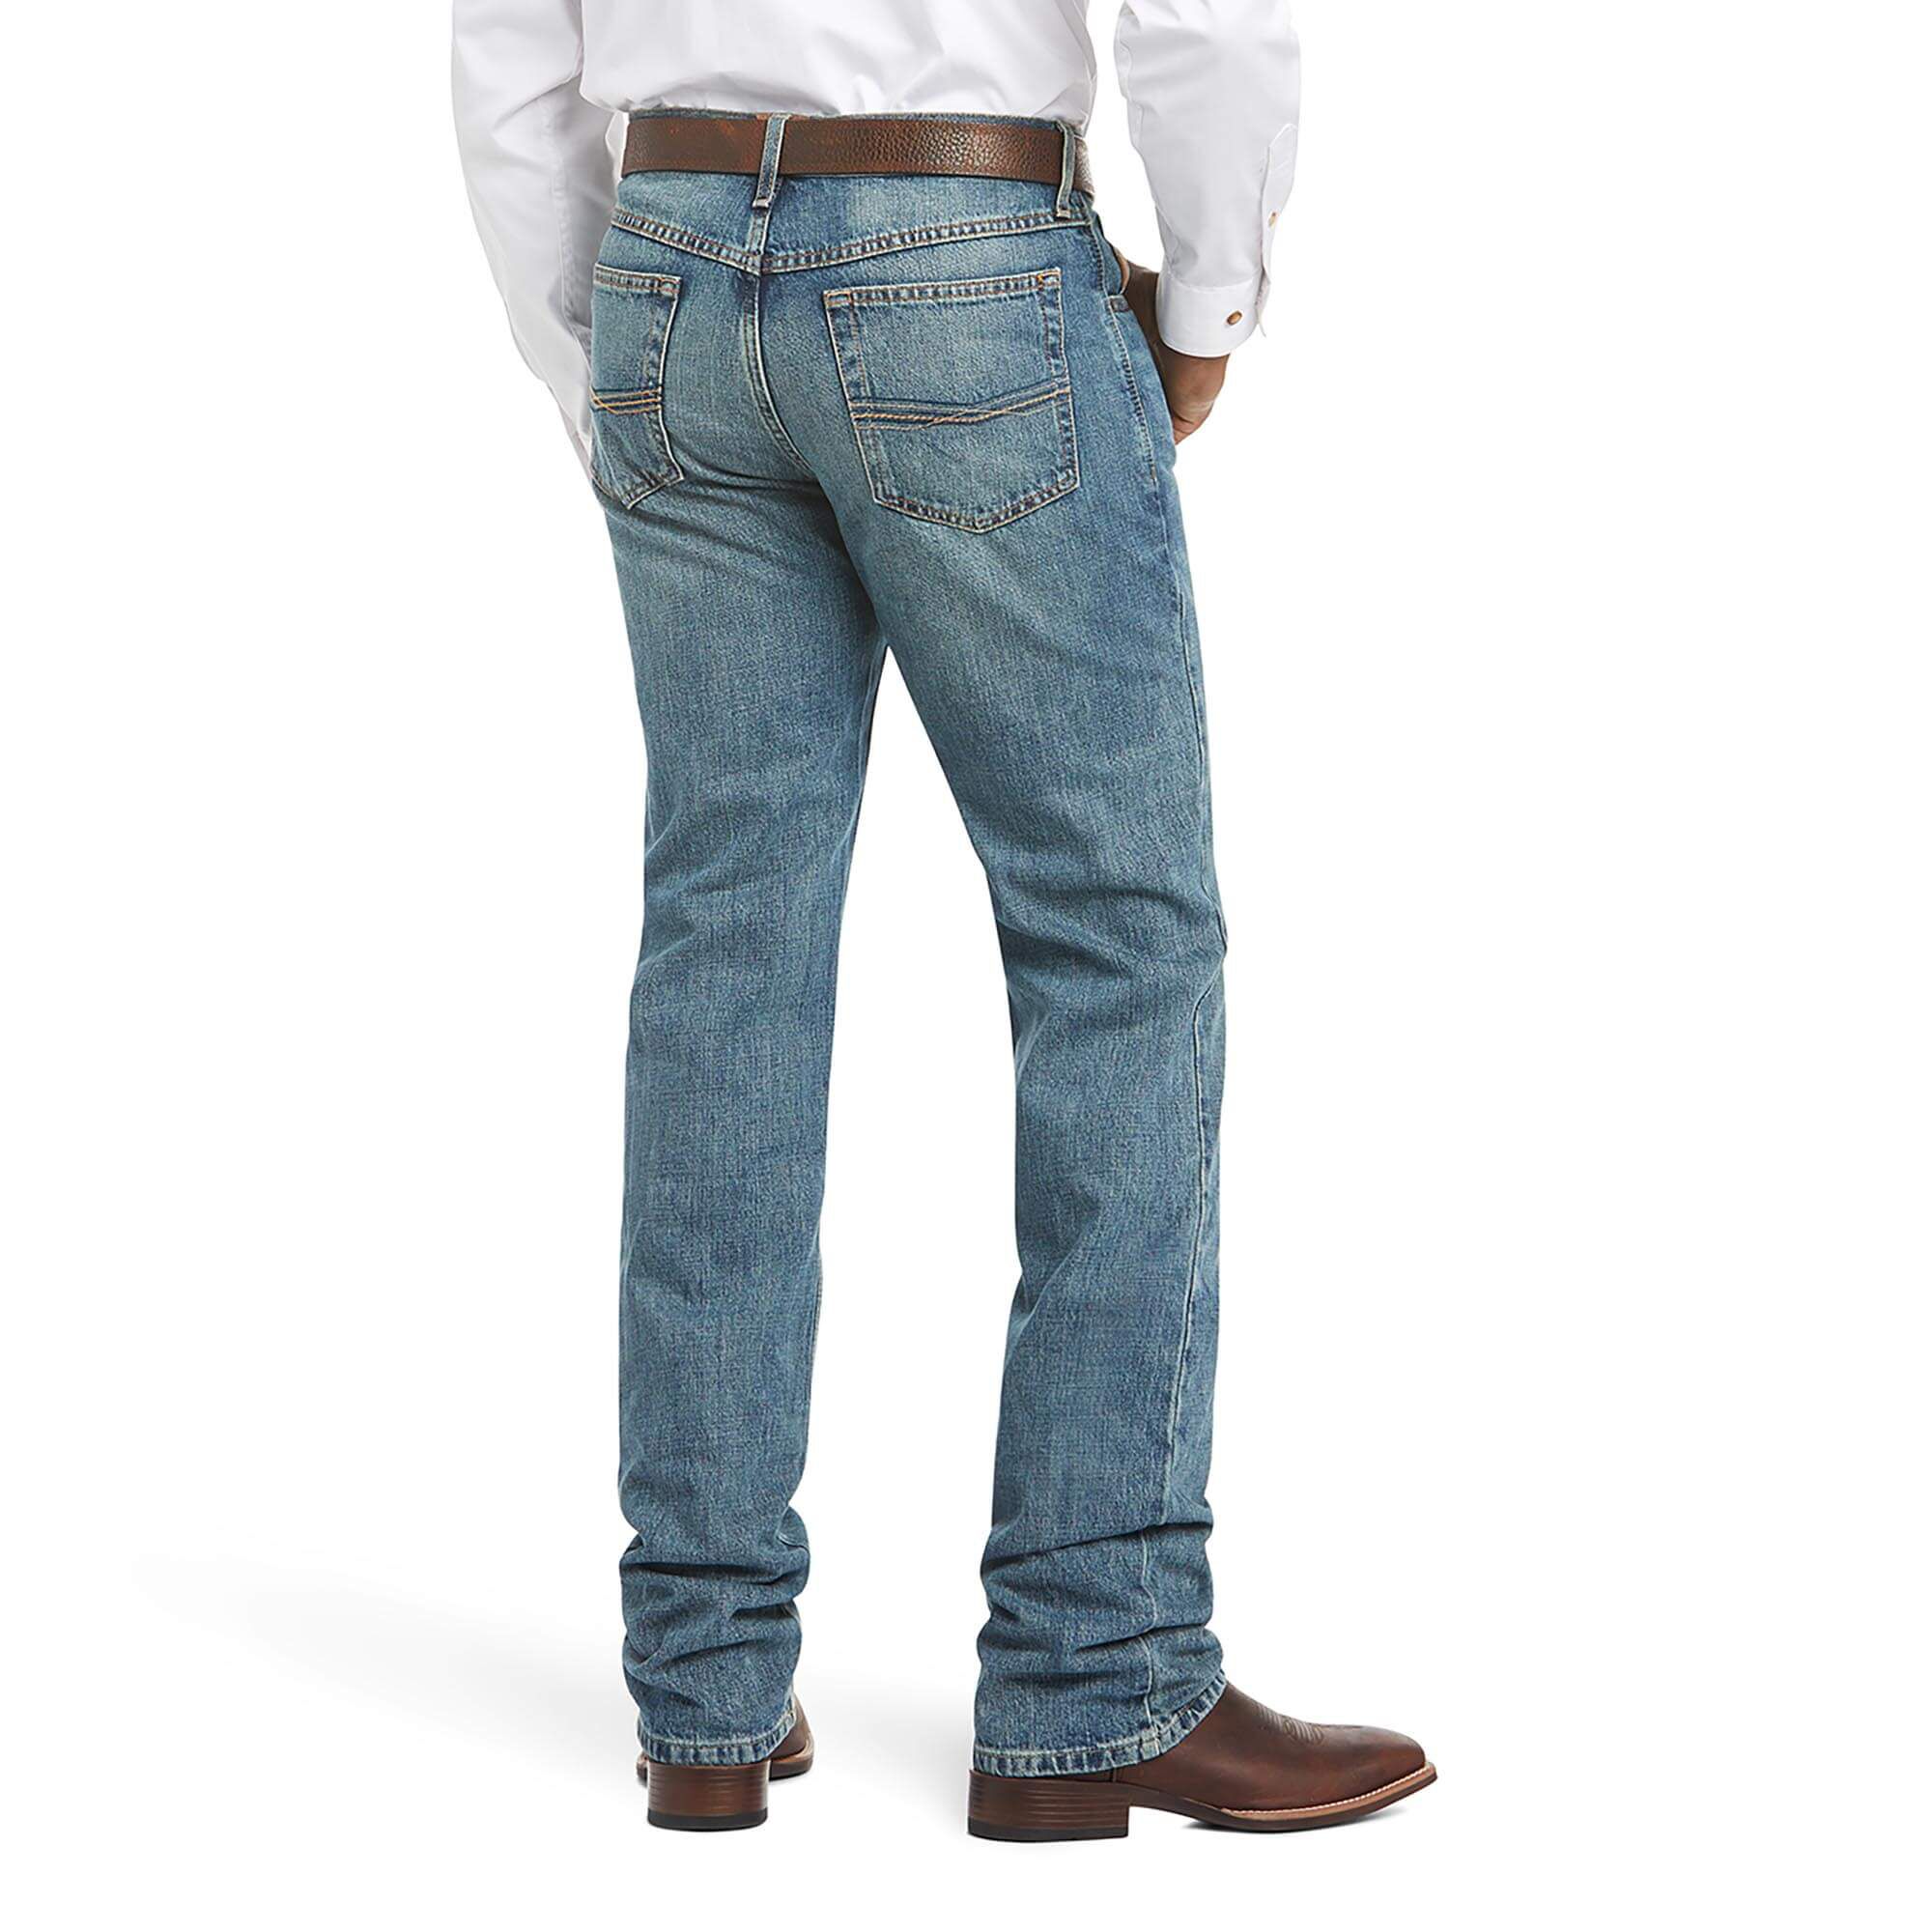 relaxed cut jeans